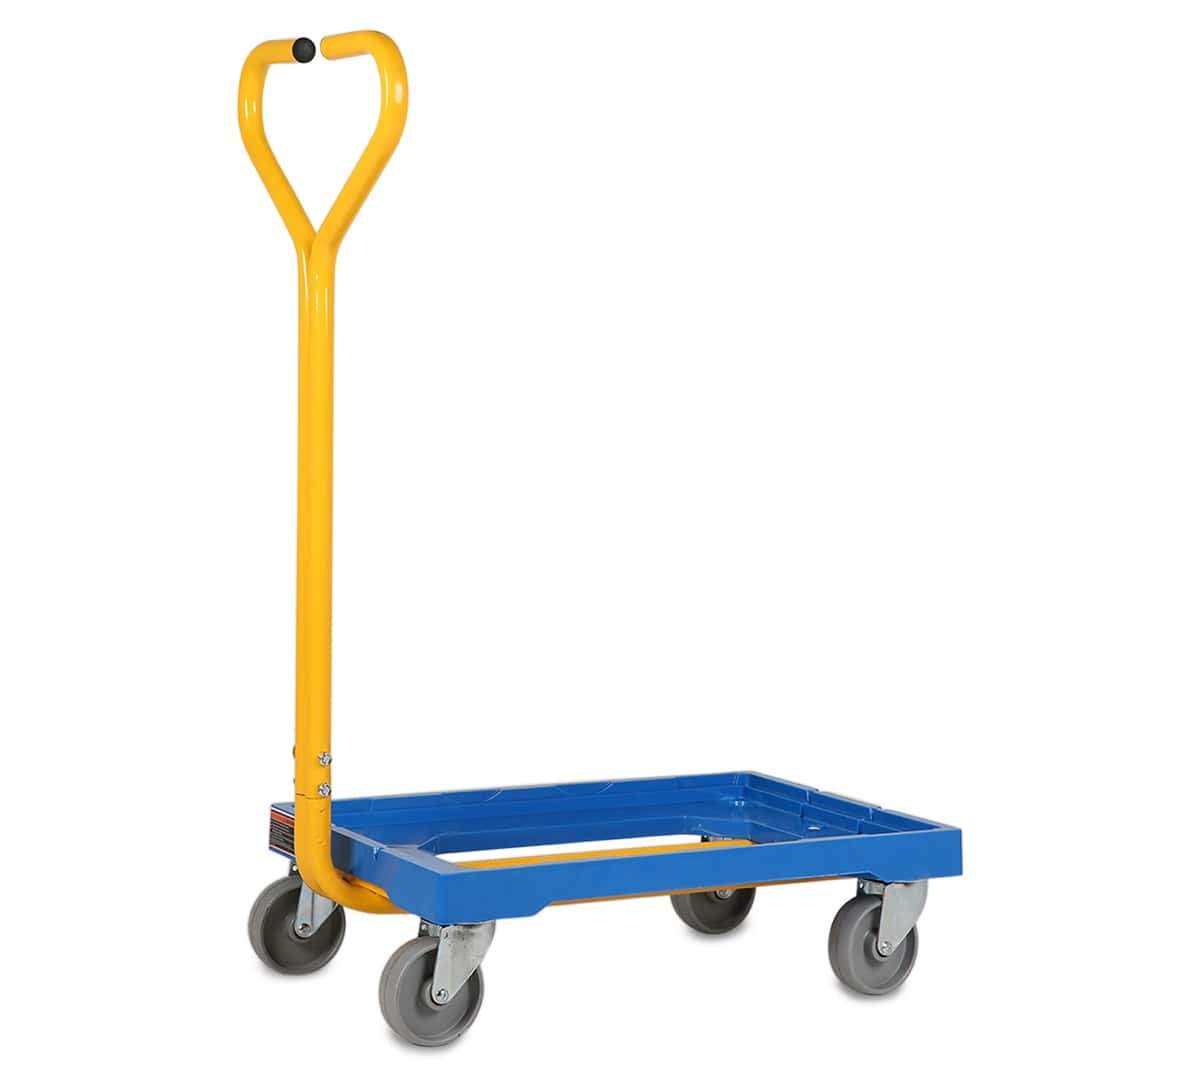 Plastic Tote Dolly with Steel Handle